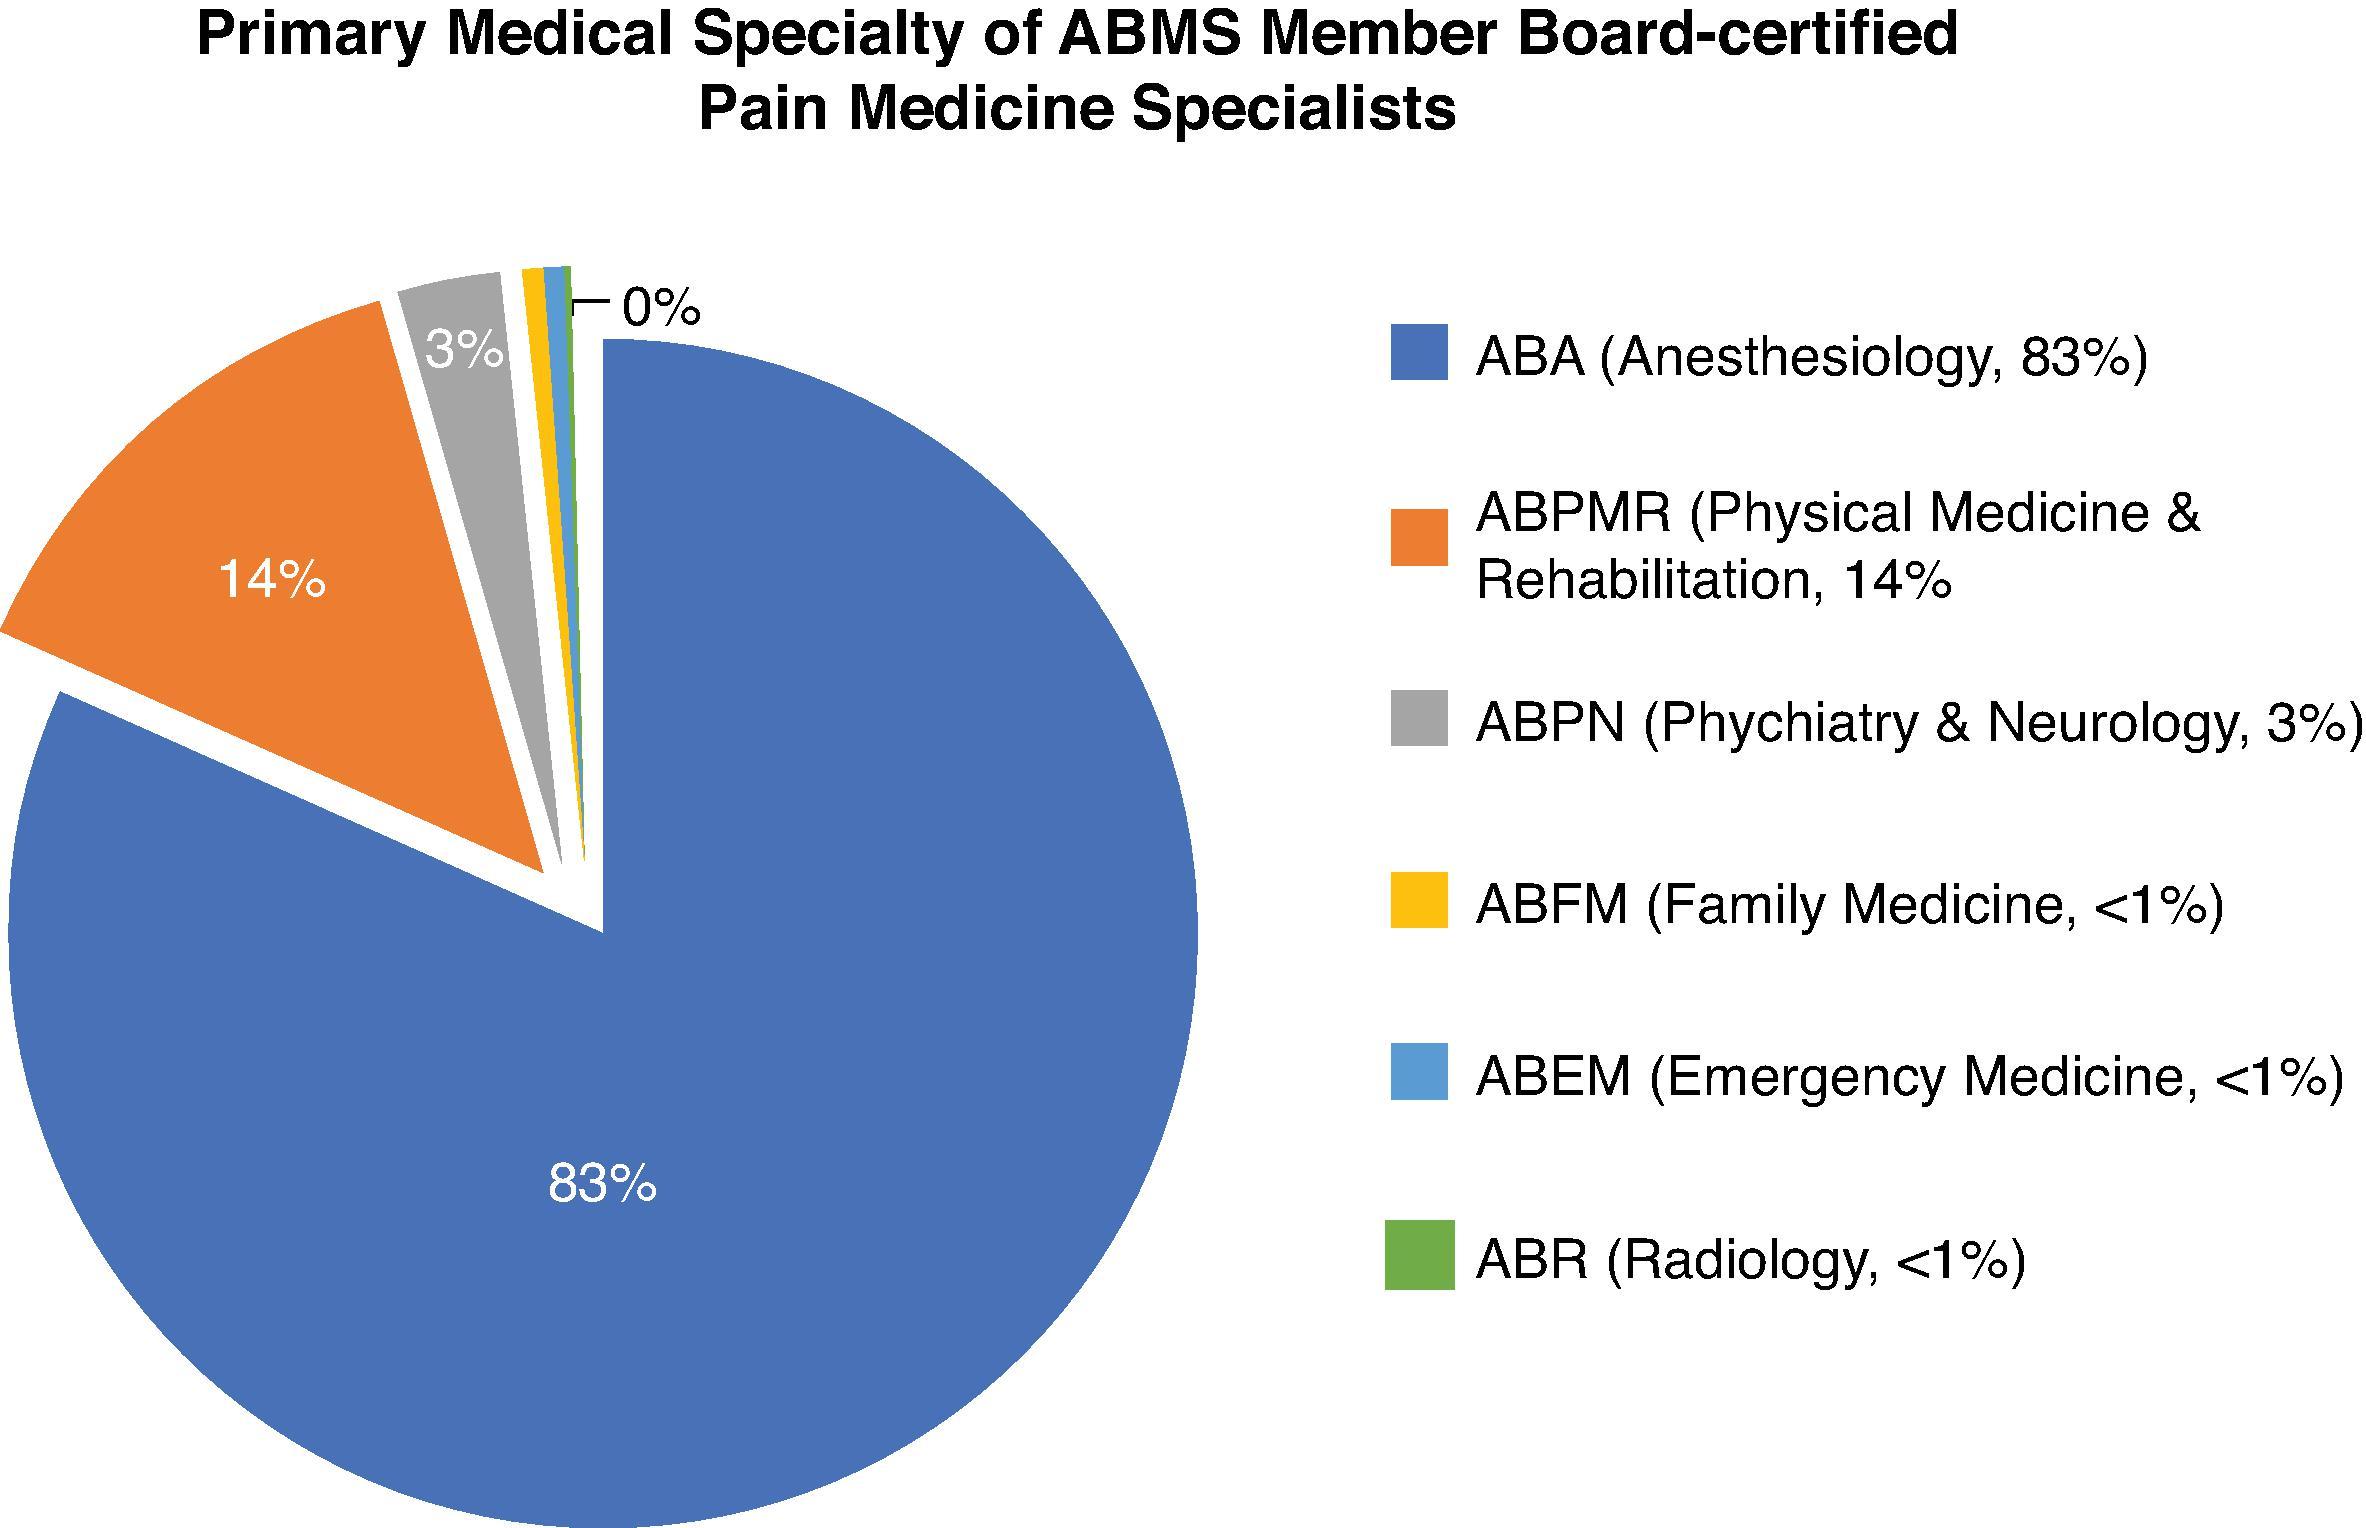 Figure 7.1, Primary specialty of board certification of diplomates receiving subspecialty certification in Pain Medicine through a member board of the American Board of Medical Specialties (ABMS). ABA, American Board of Anesthesiology; ABEM, American Board of Emergency Medicine; ABFM, American Board of Family Medicine; ABPMR, American Board of Physical Medicine and Rehabilitation; ABPN, American Board of Psychiatry and Neurology; ABR, American Board of Radiology (Data courtesy of the American Board of Anesthesiology, July 2021).